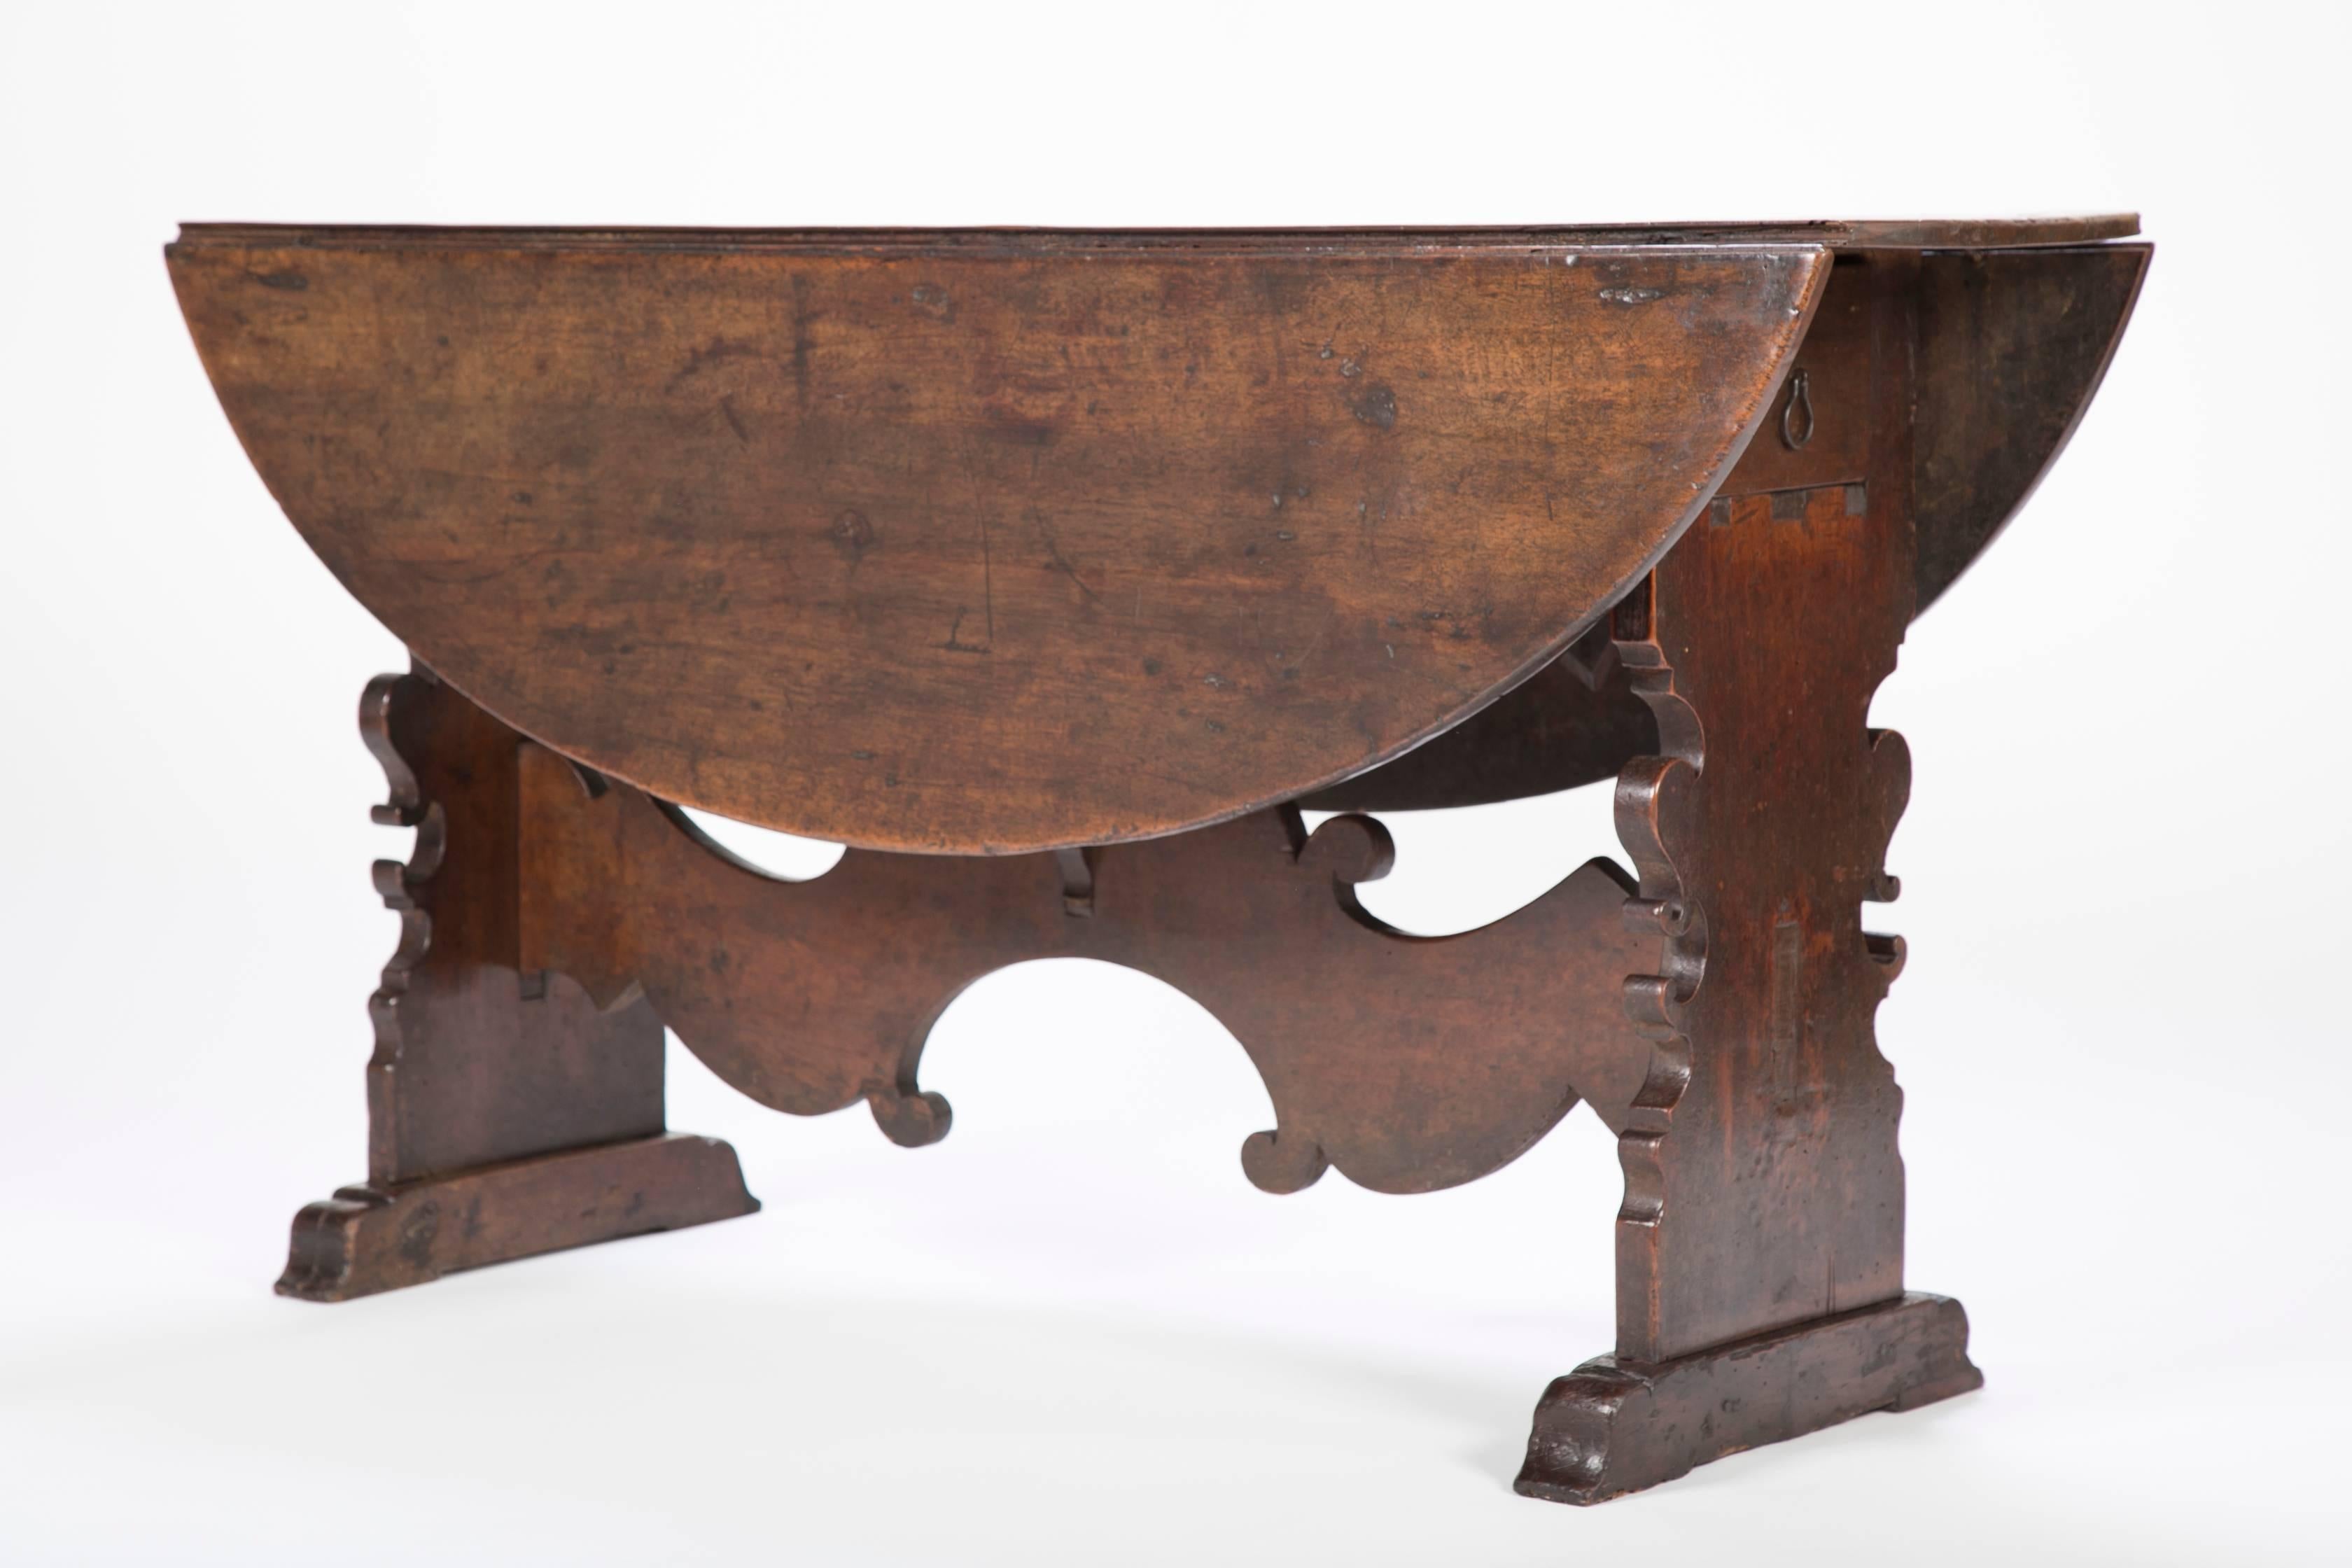 Best quality 16th-17th century Italian walnut table with a rich honey patina. The end profiles and trestle base are the epitome of the Baroque. This table will make a unique breakfast or sofa table for any style interior. Drawers at either